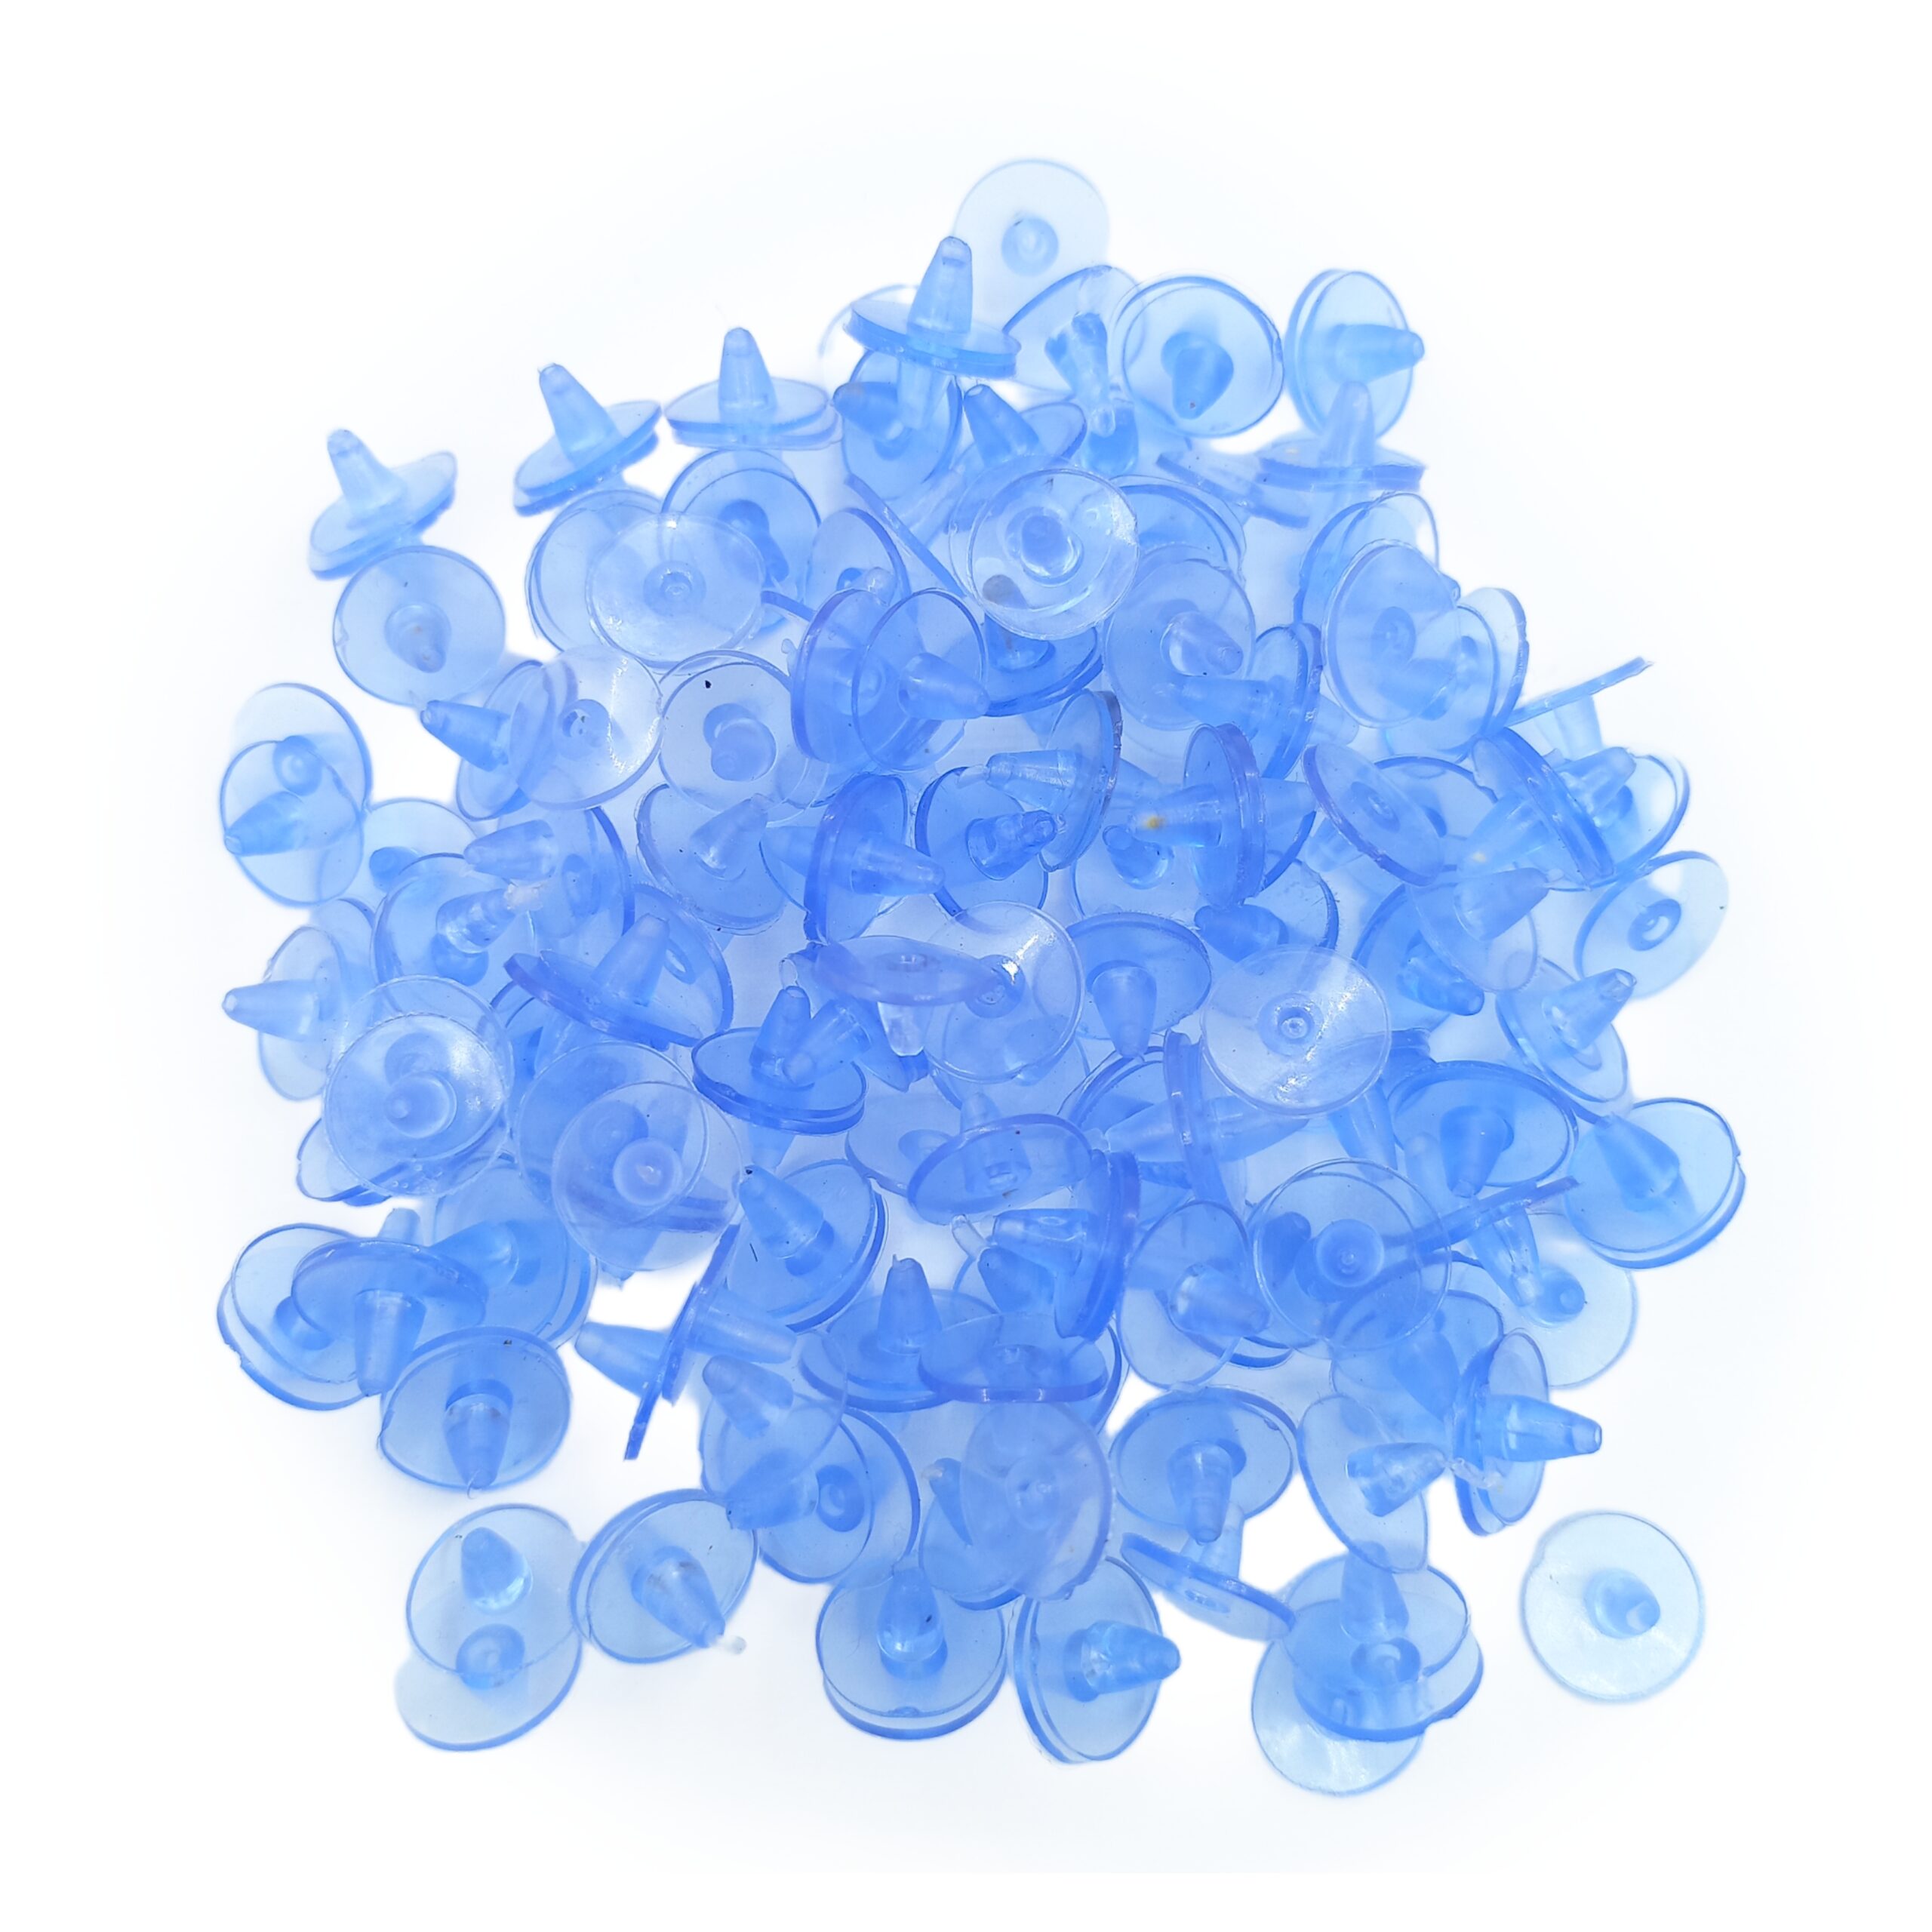 100pc Clear Silicone Plastic Comfort Clutch Earring Backs Earring Nuts 10mm  X 6mm Soft Plastic Earring Stoppers SF1537A 